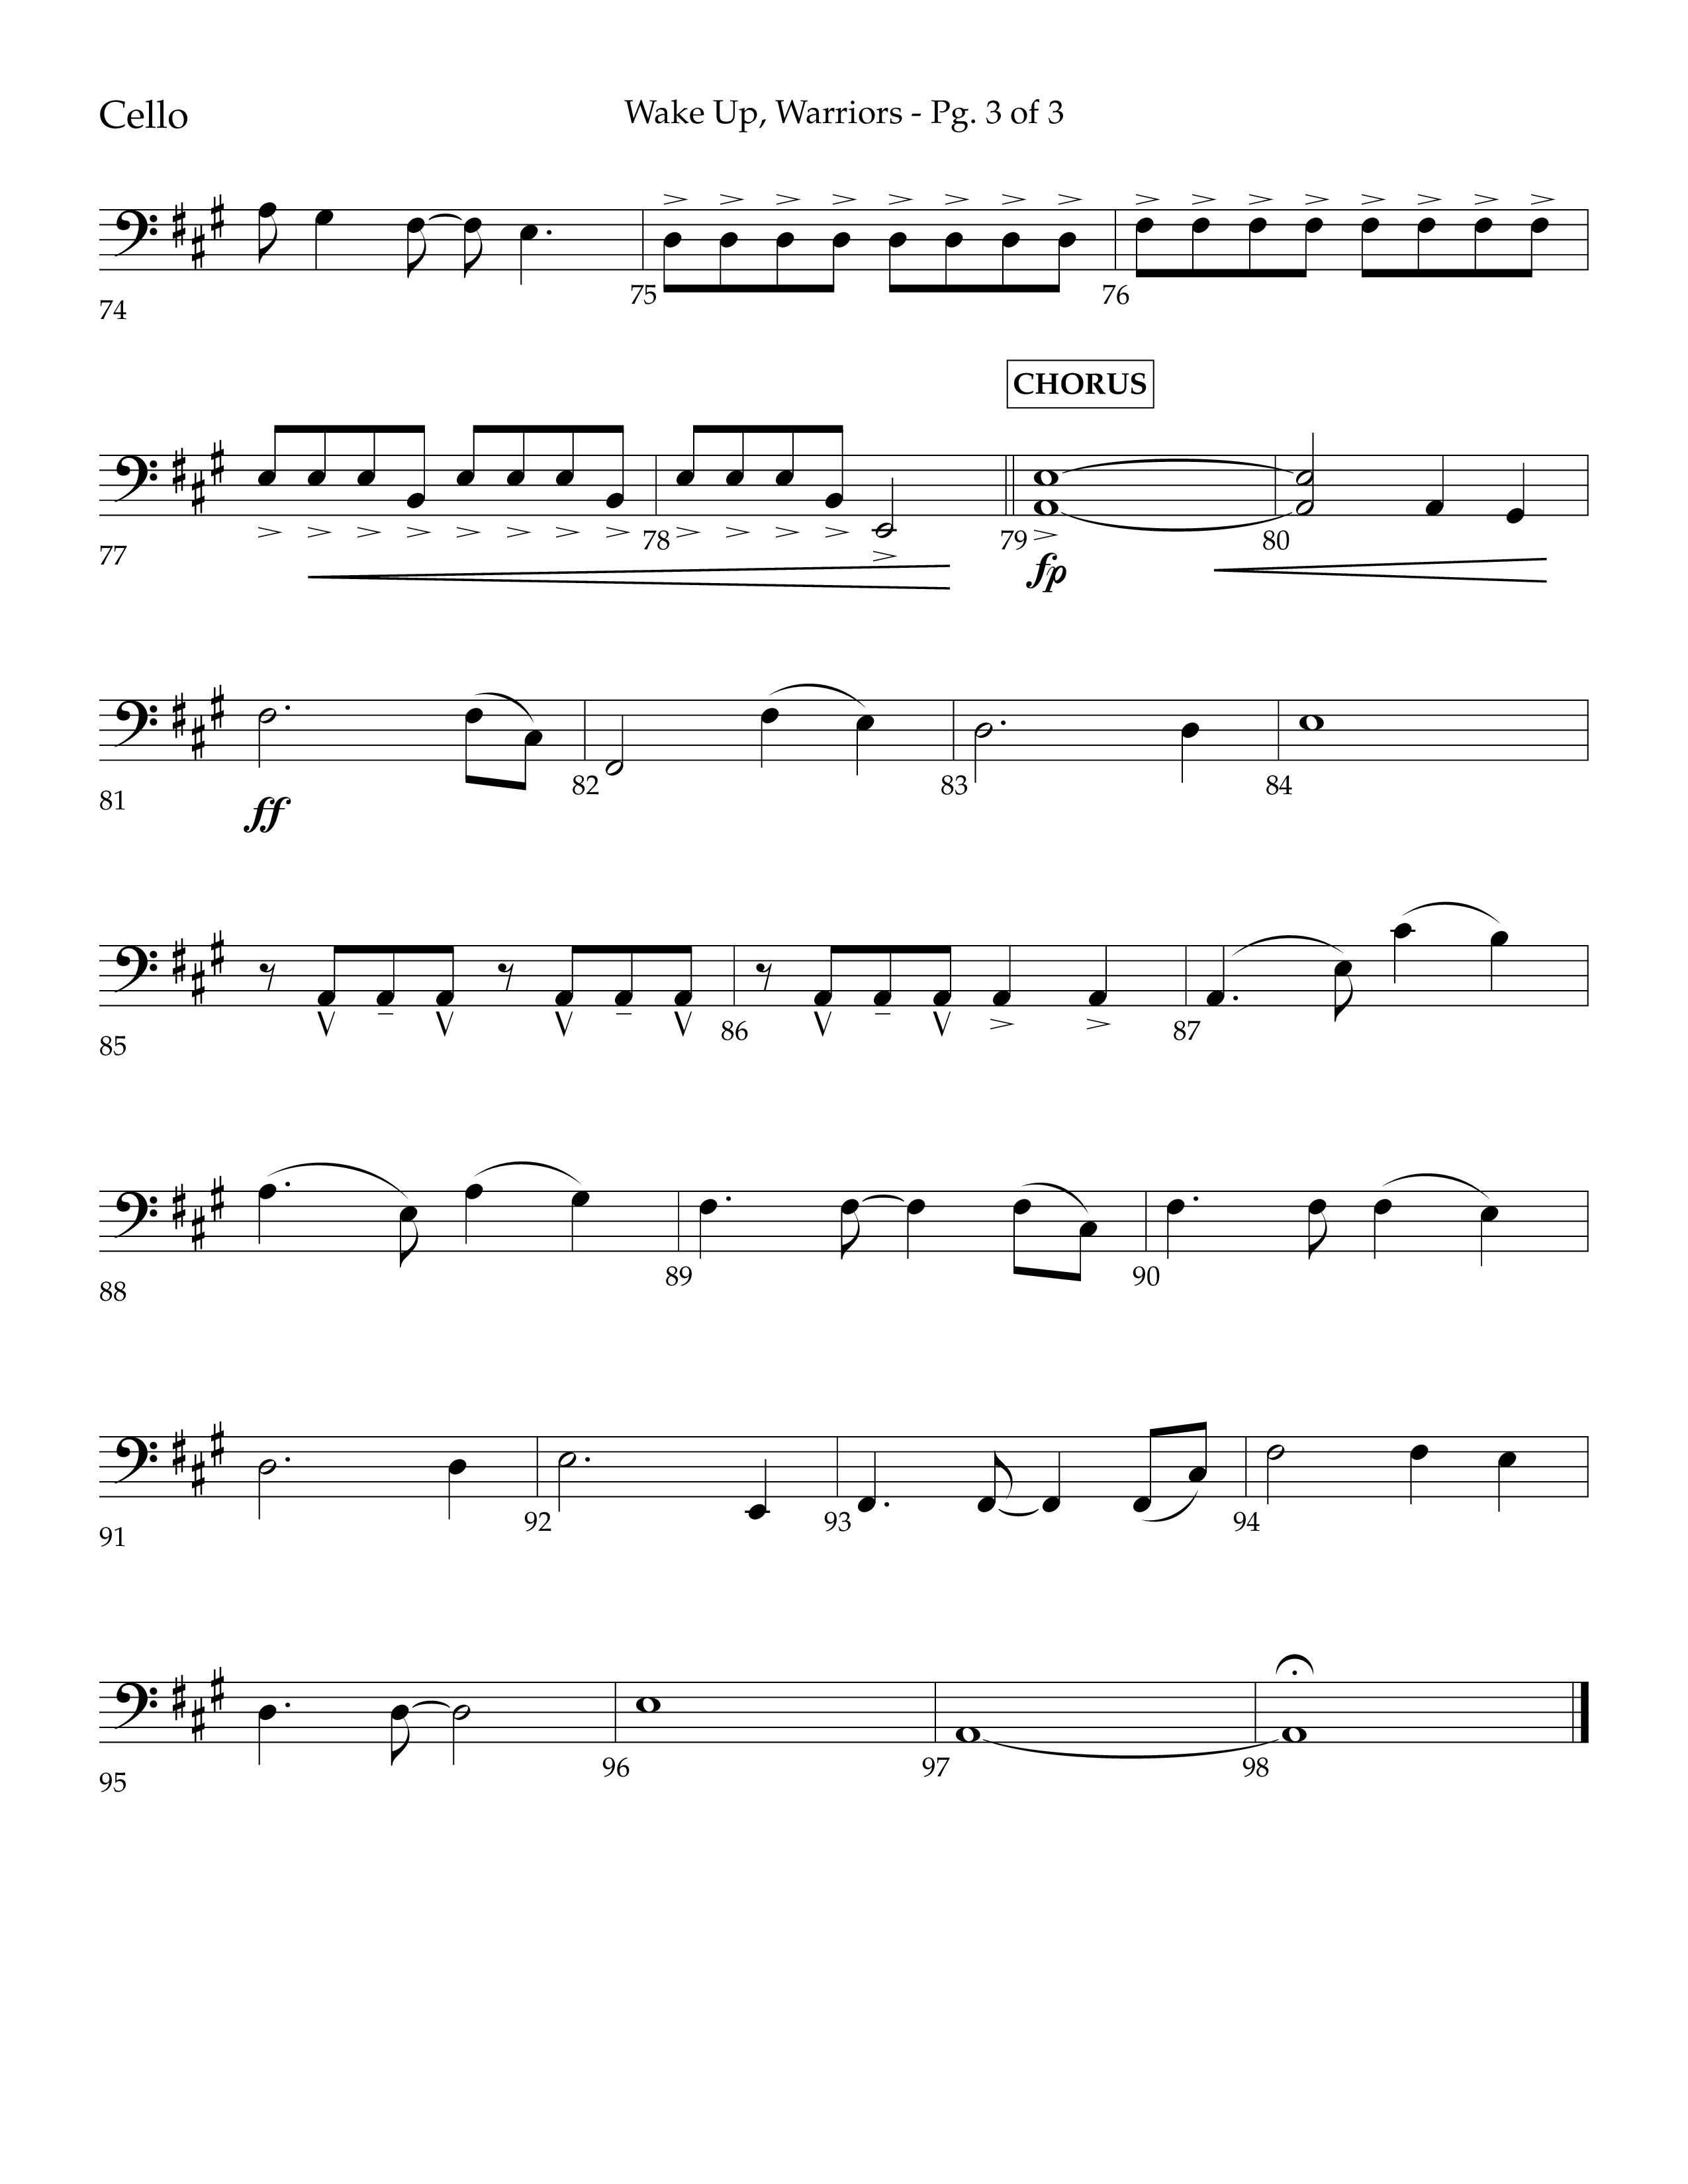 Wake Up Warriors (Choral Anthem SATB) Cello (Lifeway Choral / Arr. John Bolin / Orch. Tim Cates)